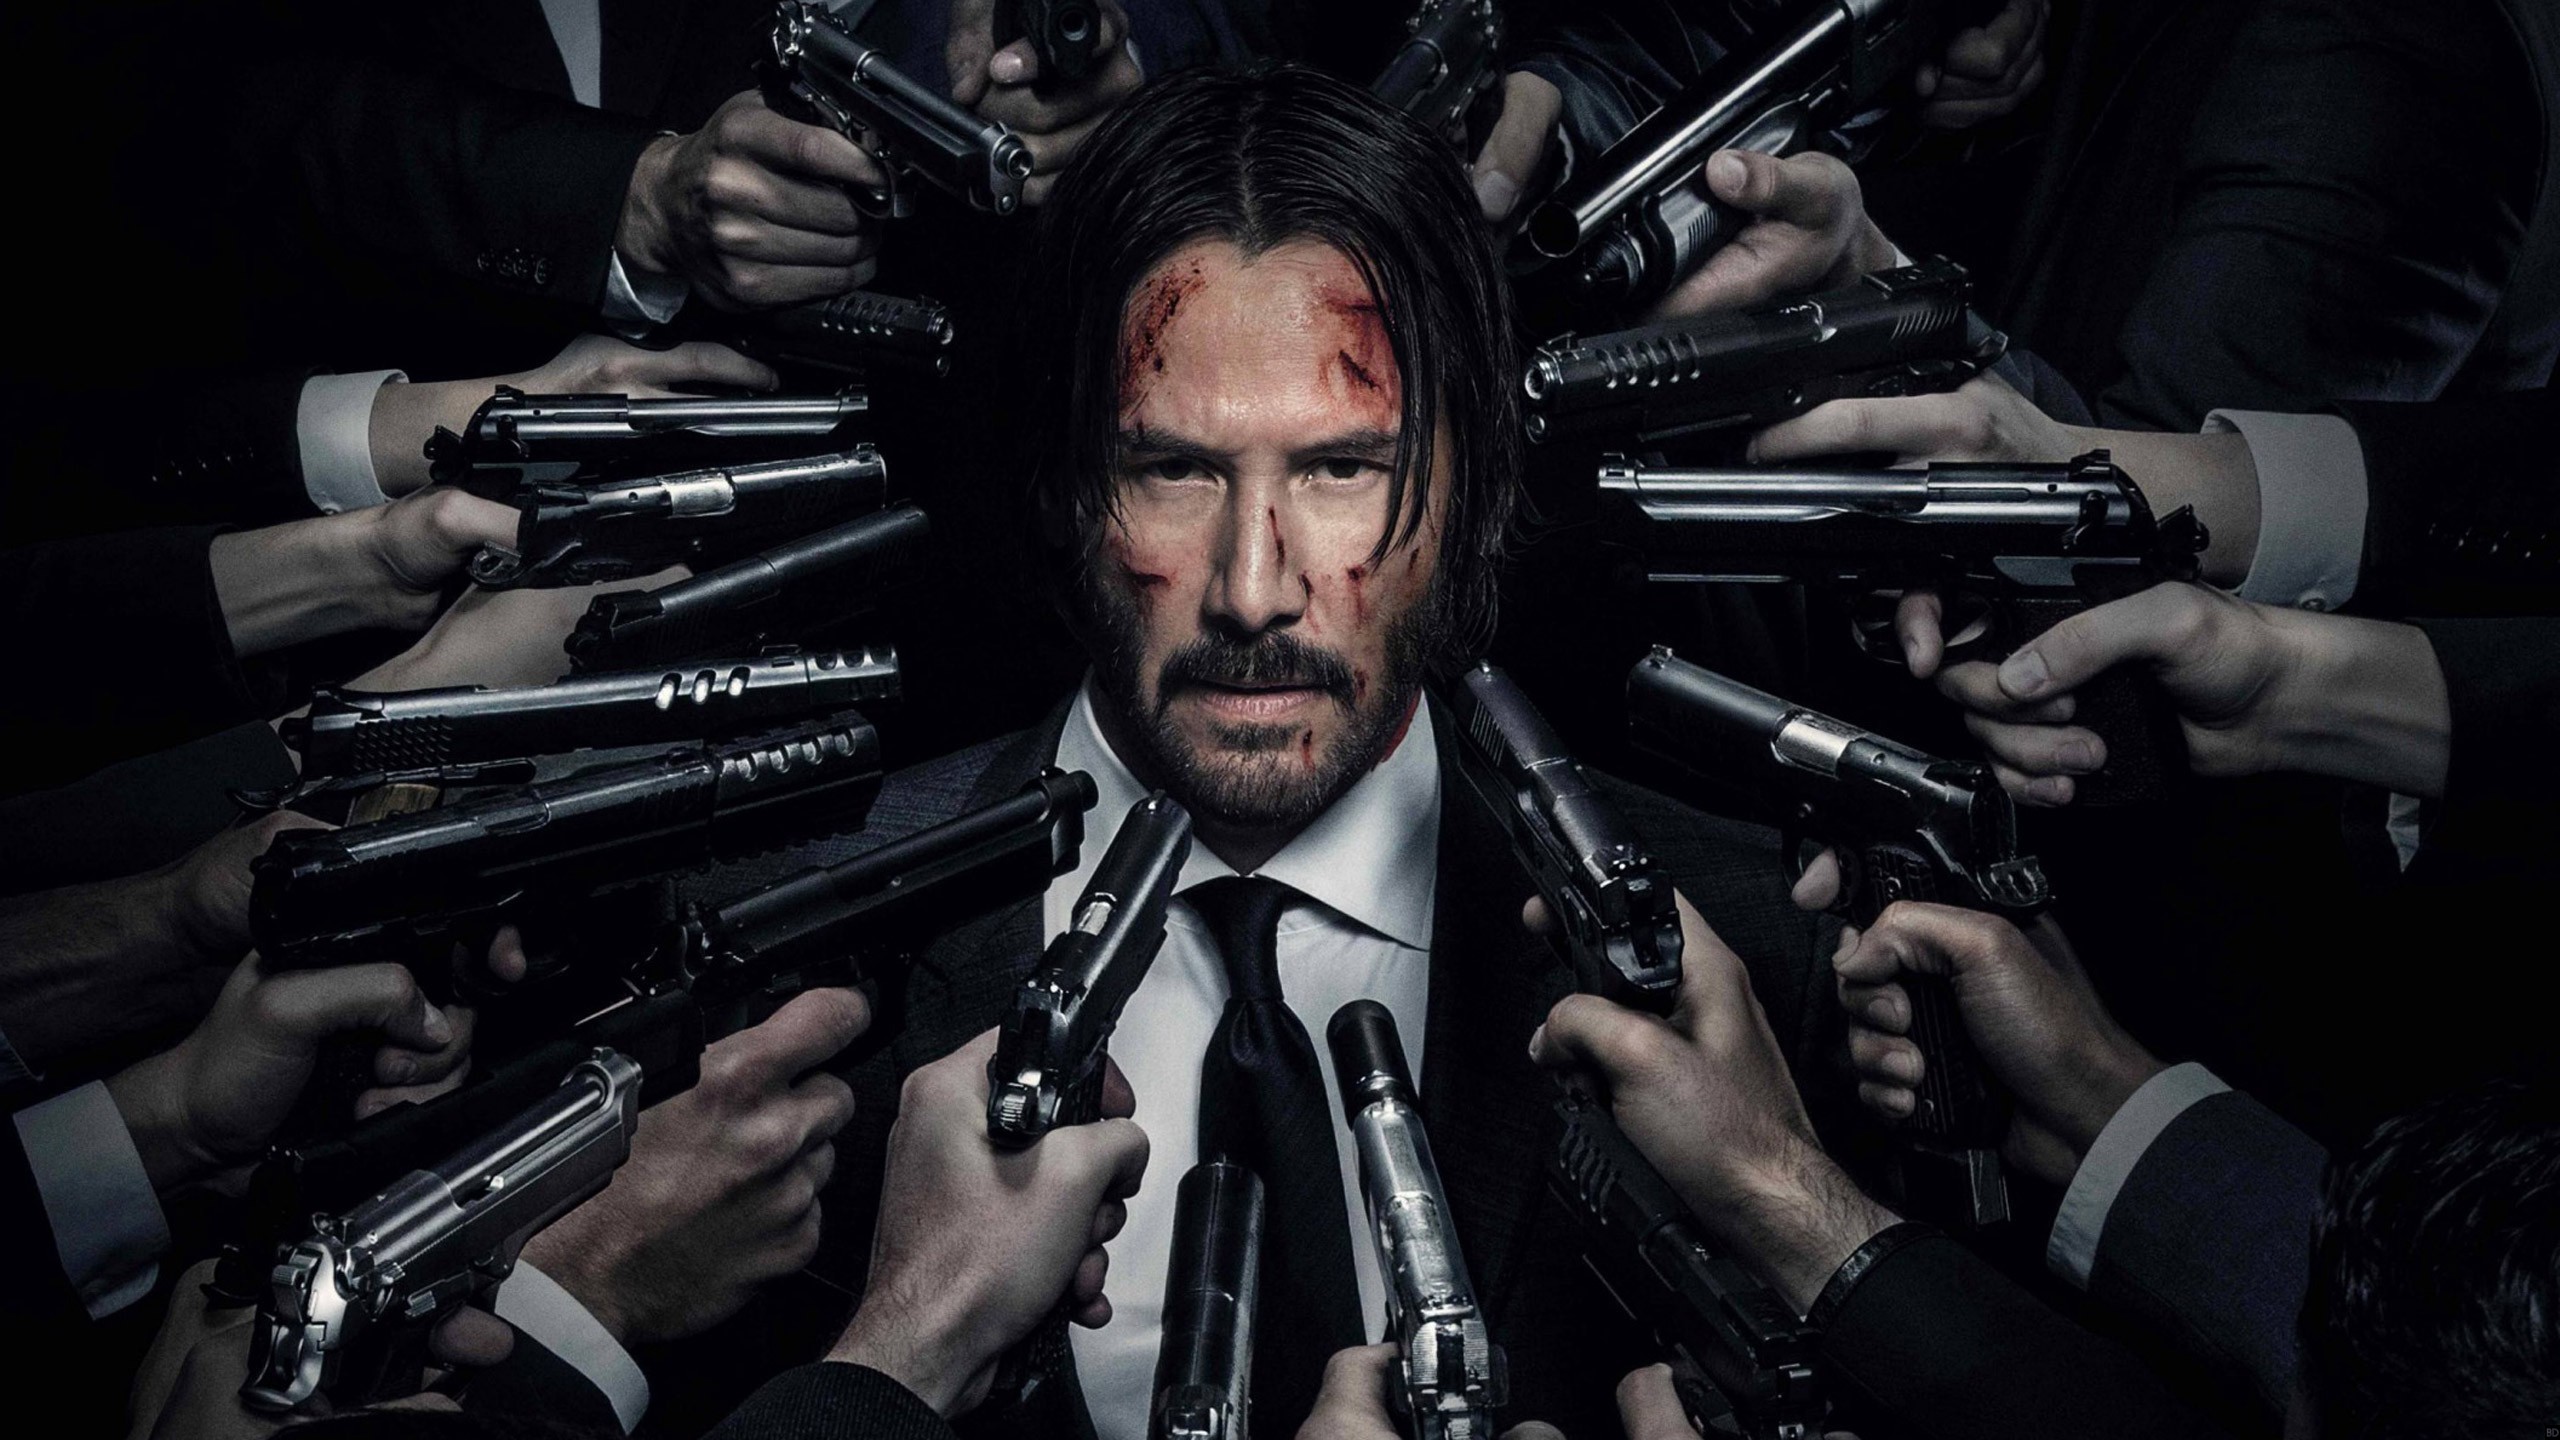 John Wick: Chapter 3' Shoots Up a Release Date